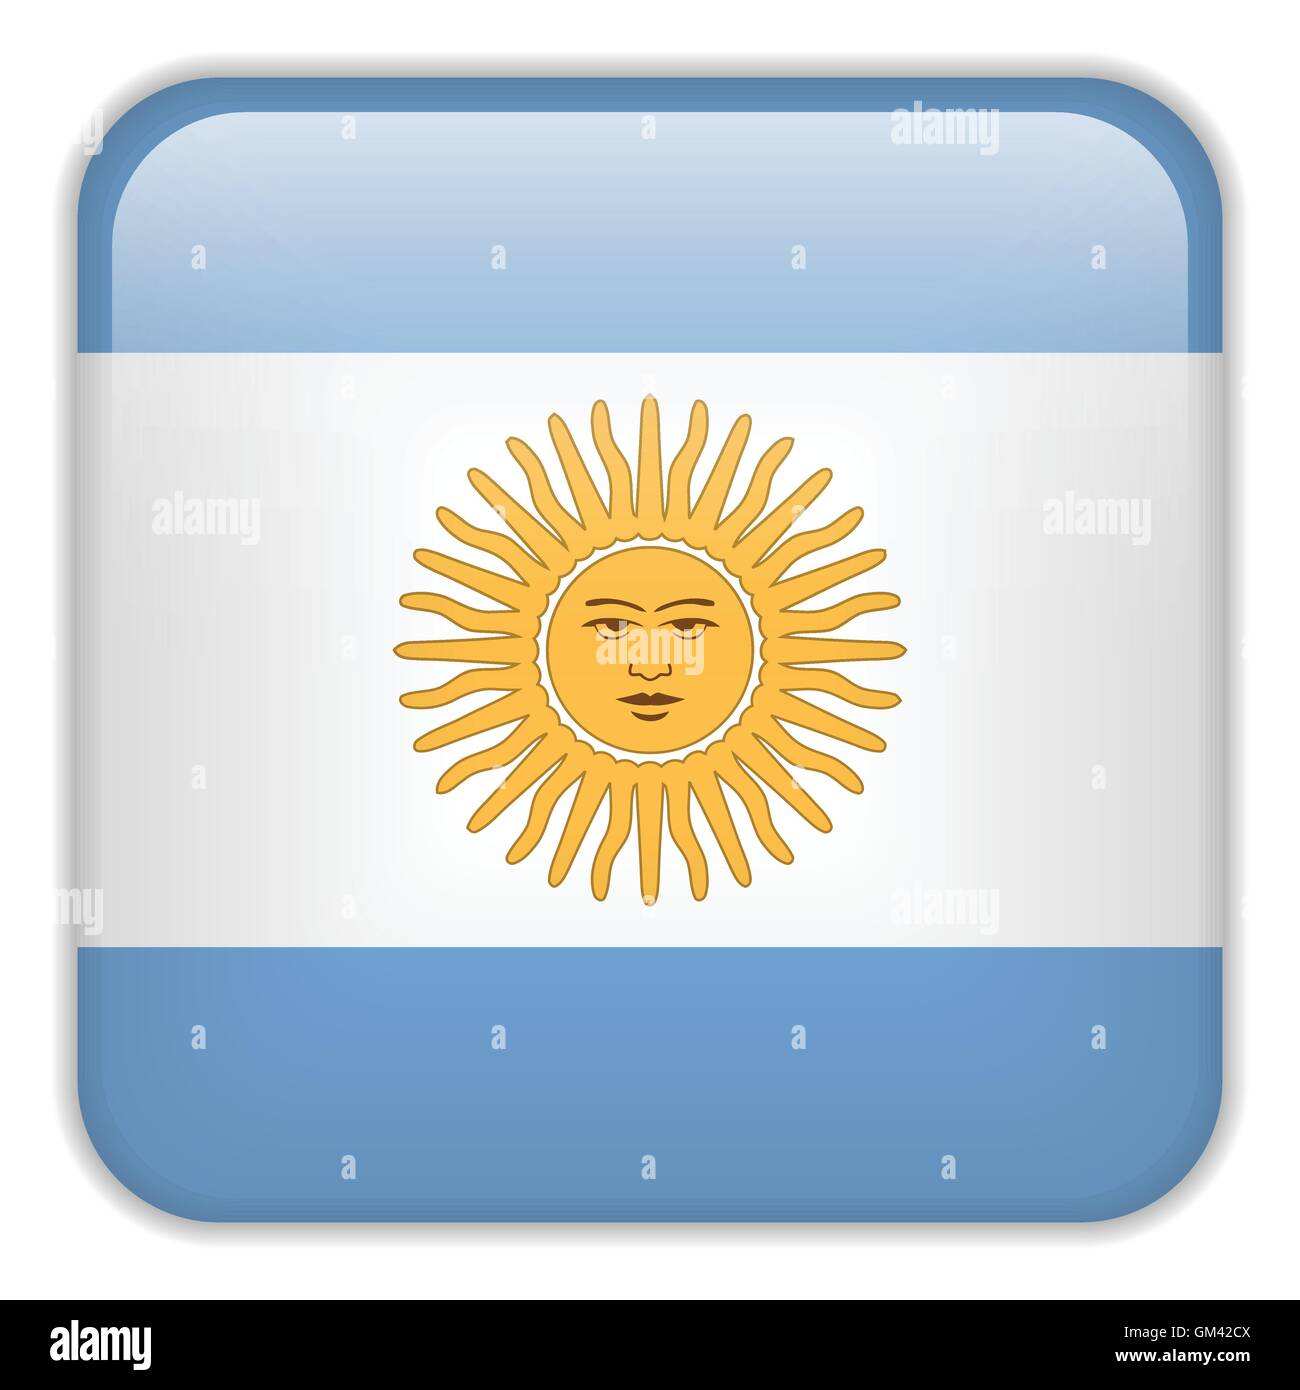 Argentinien Flagge Smartphone Anwendung Square Buttons Stock Vektor